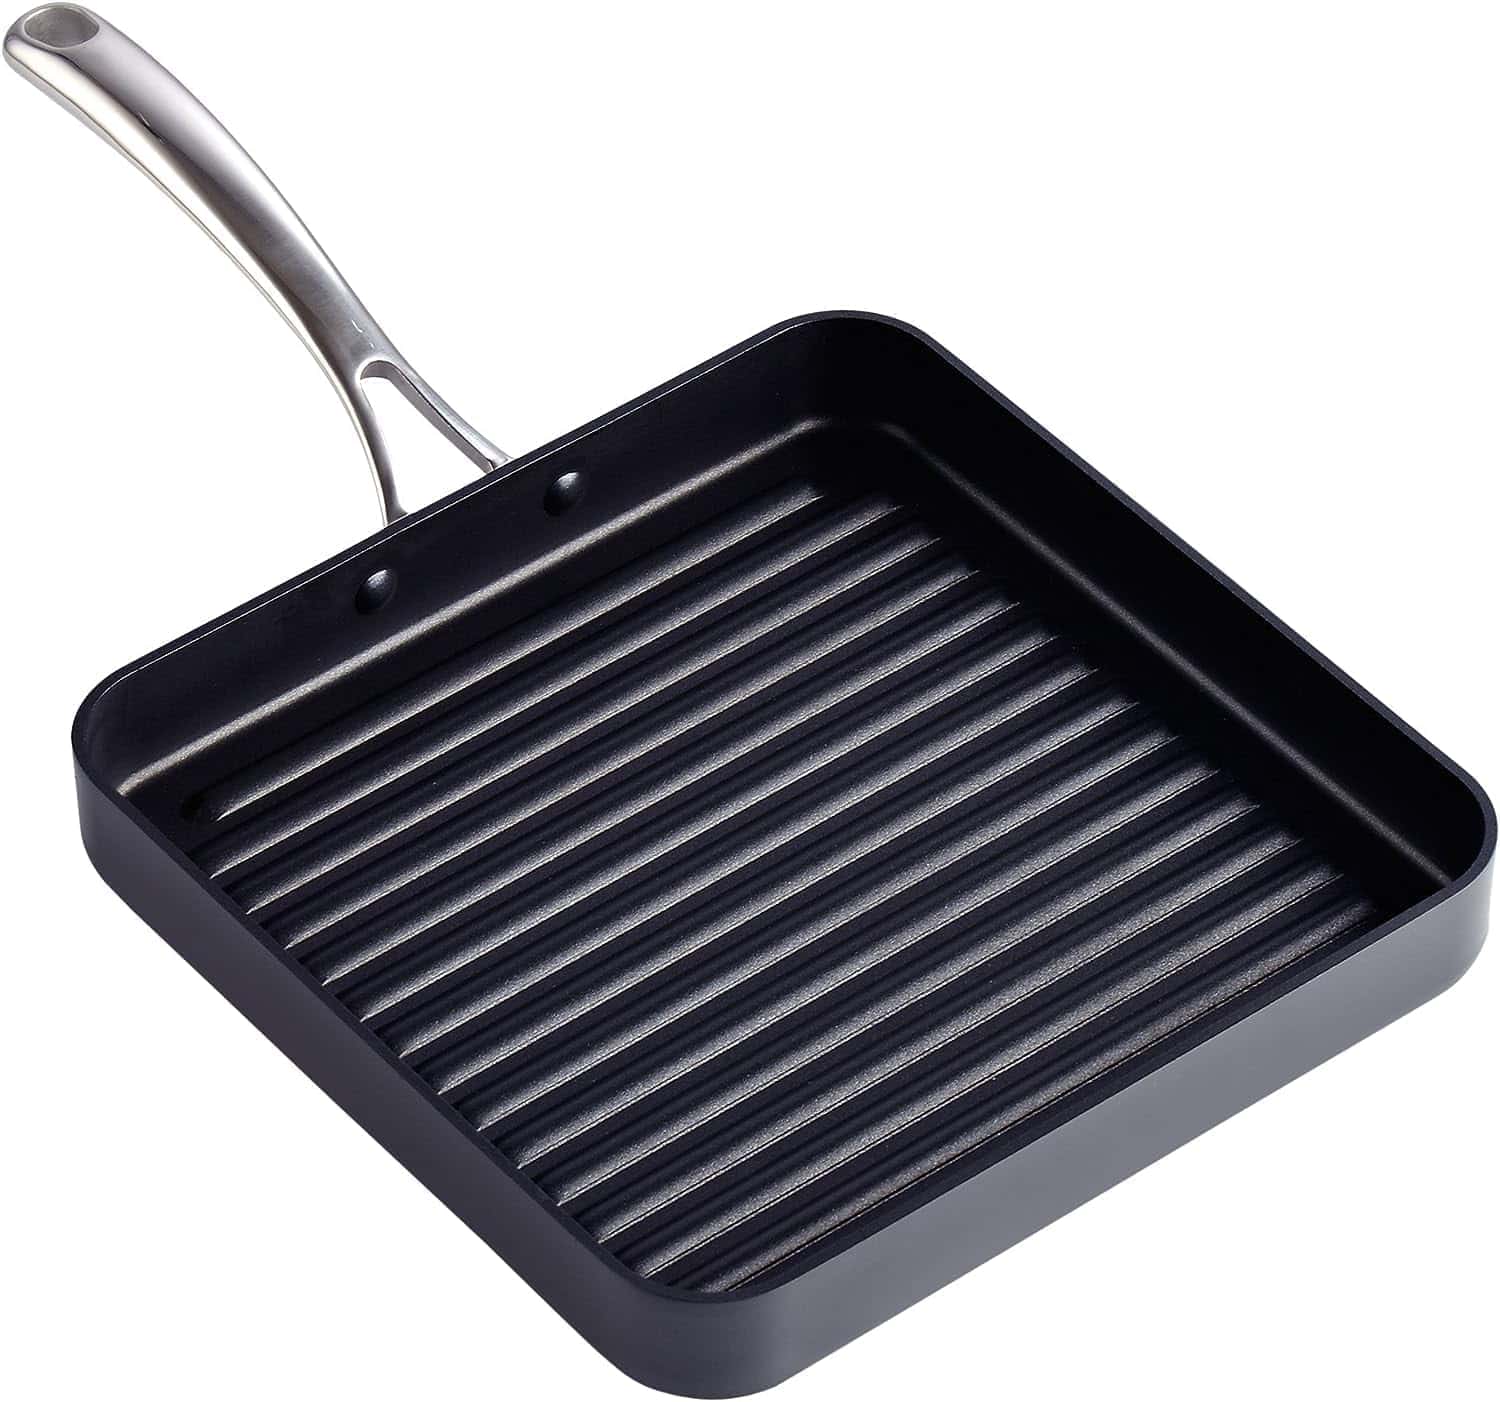 Cooks Standard Nonstick Square Grill Pan